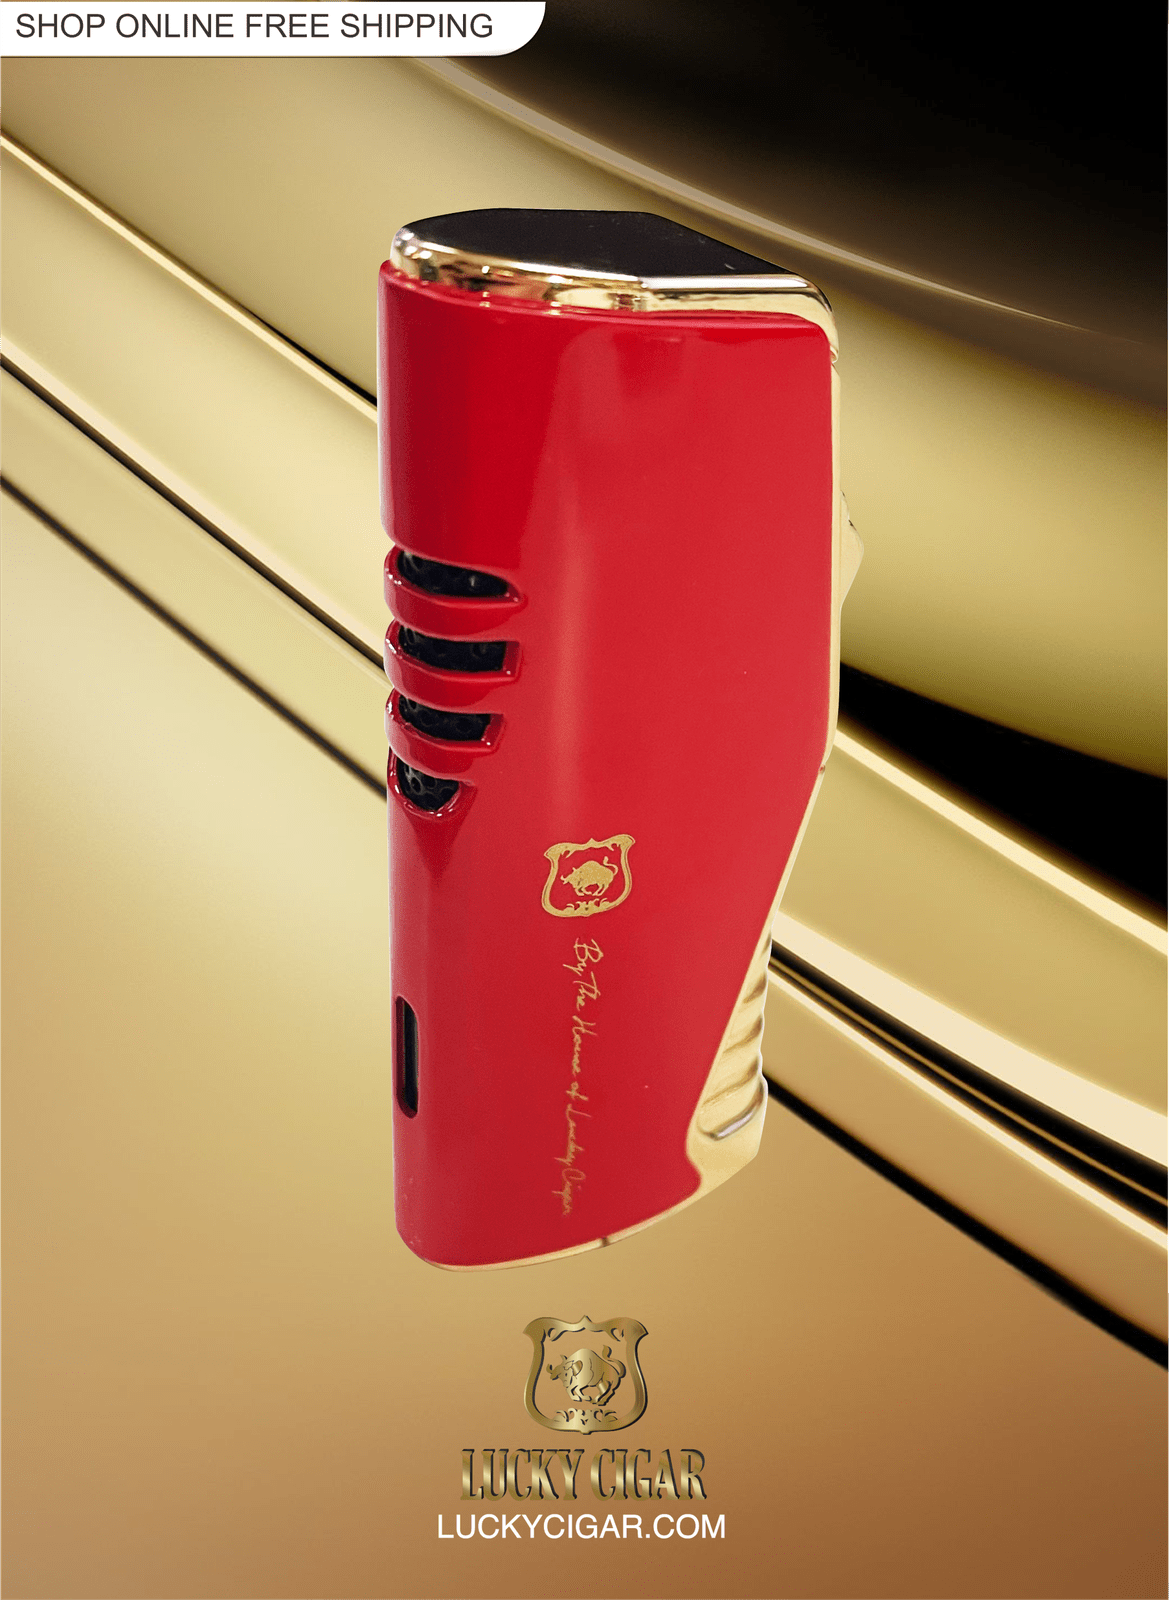 Cigar Lifestyle Accessories: Torch Lighter in Red/Gold